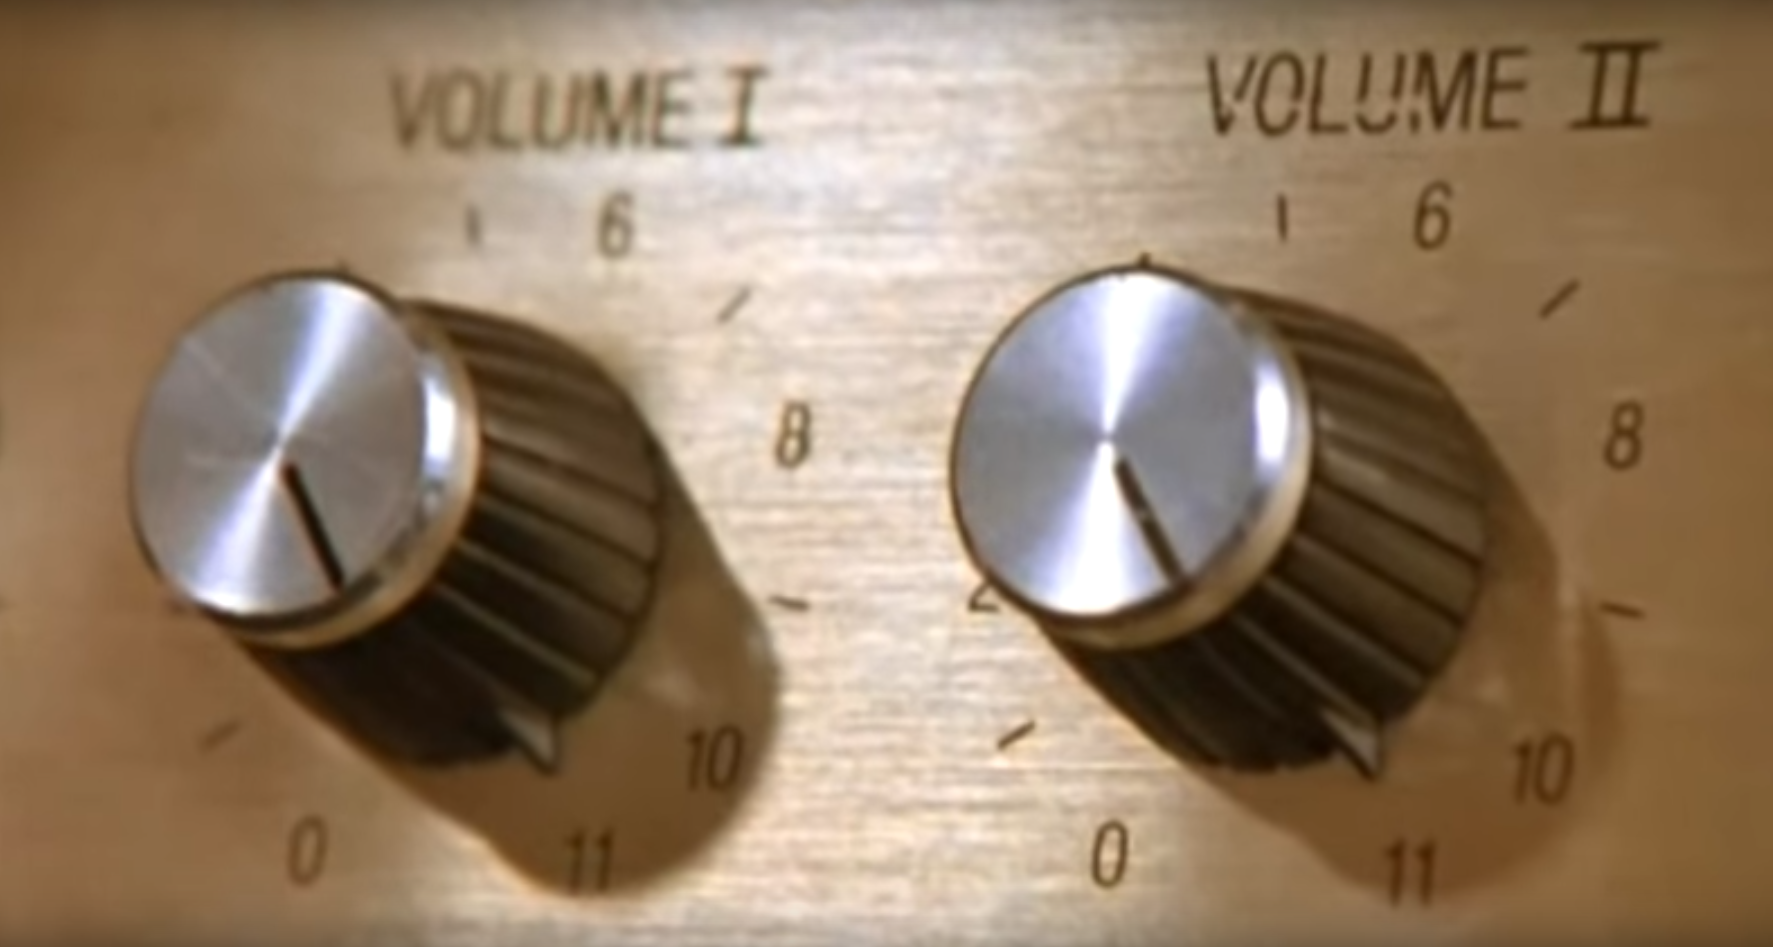 Spinal tap - these go to 11!